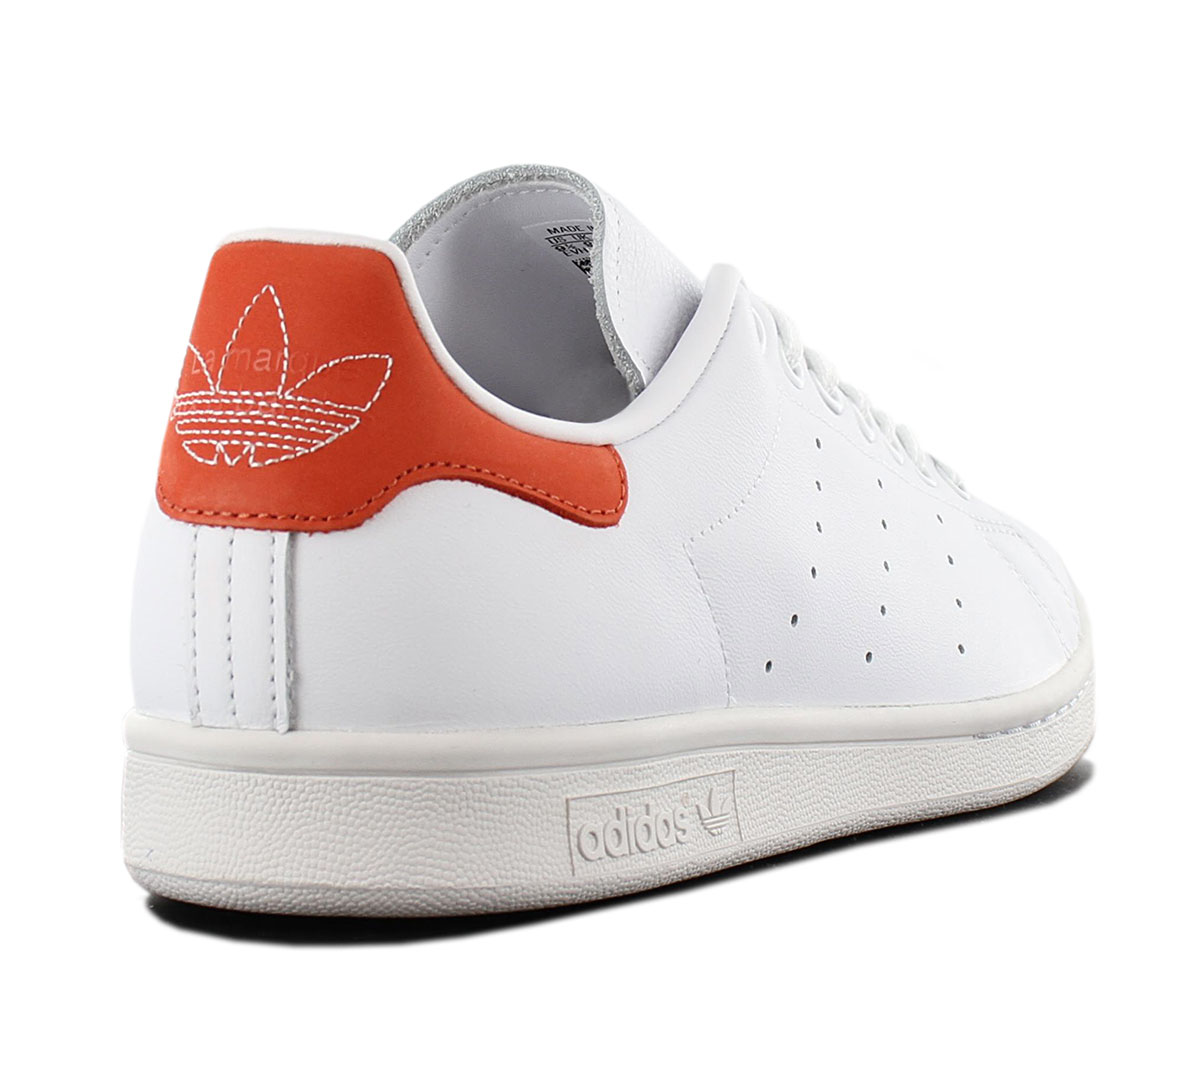 NEW adidas Originals Stan Smith BD8023 Men´s Shoes Trainers Sneakers SALE |  eBay